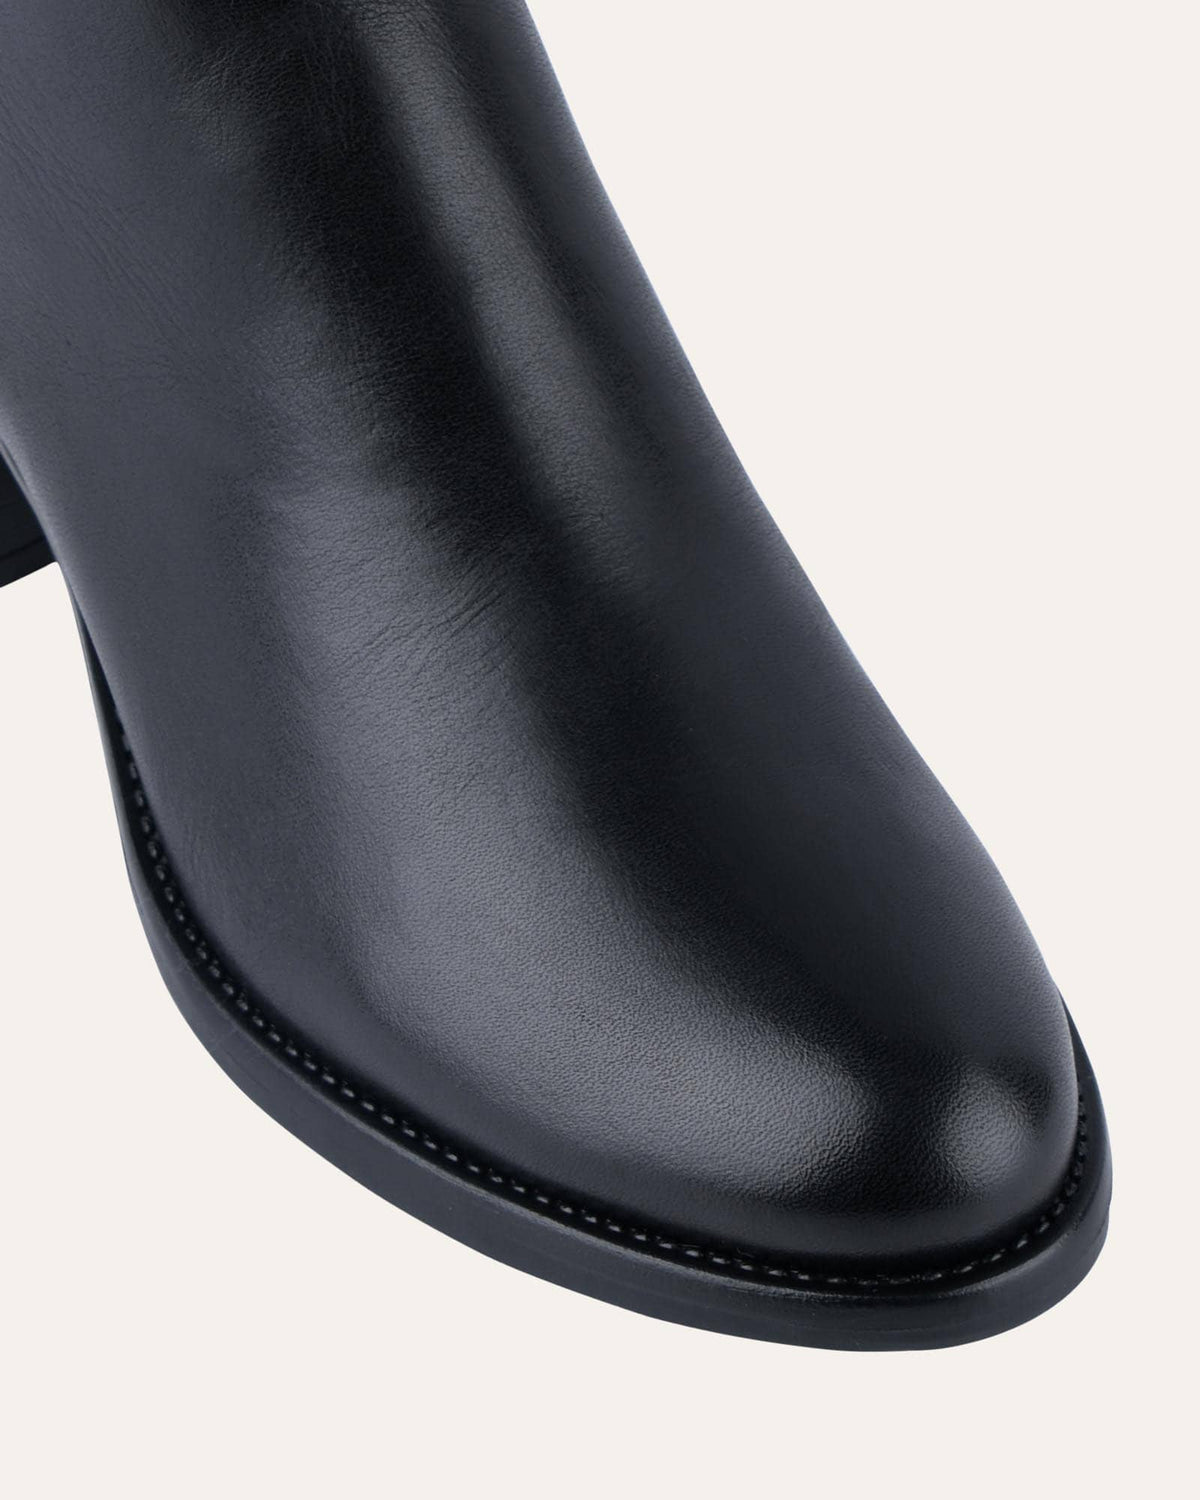 CHICAGO KNEE BOOTS BLACK LEATHER